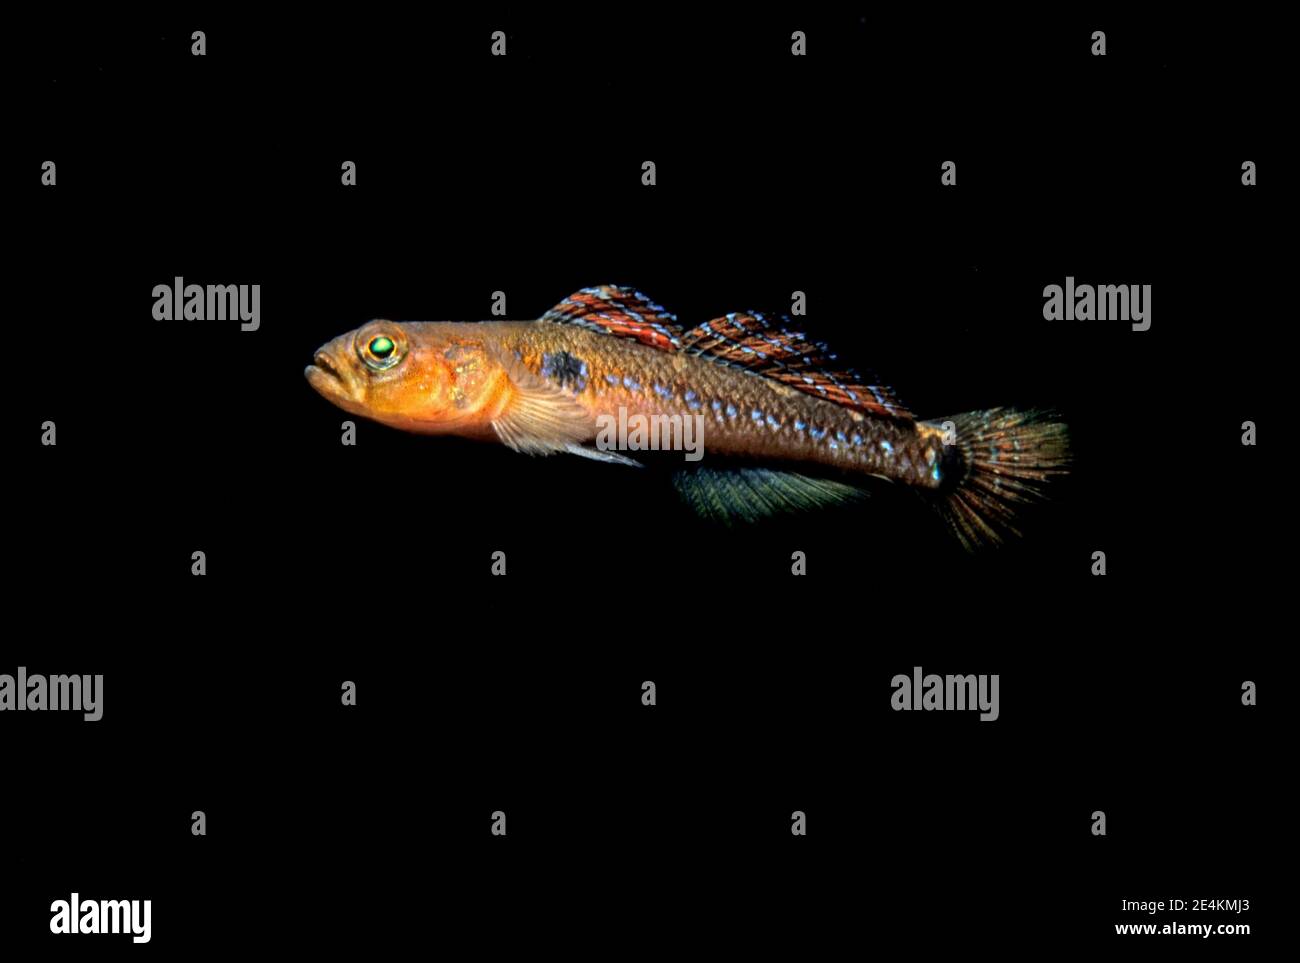 Two-spotted goby (Gobiusculus flavescens) in coastal waters, UK. Stock Photo